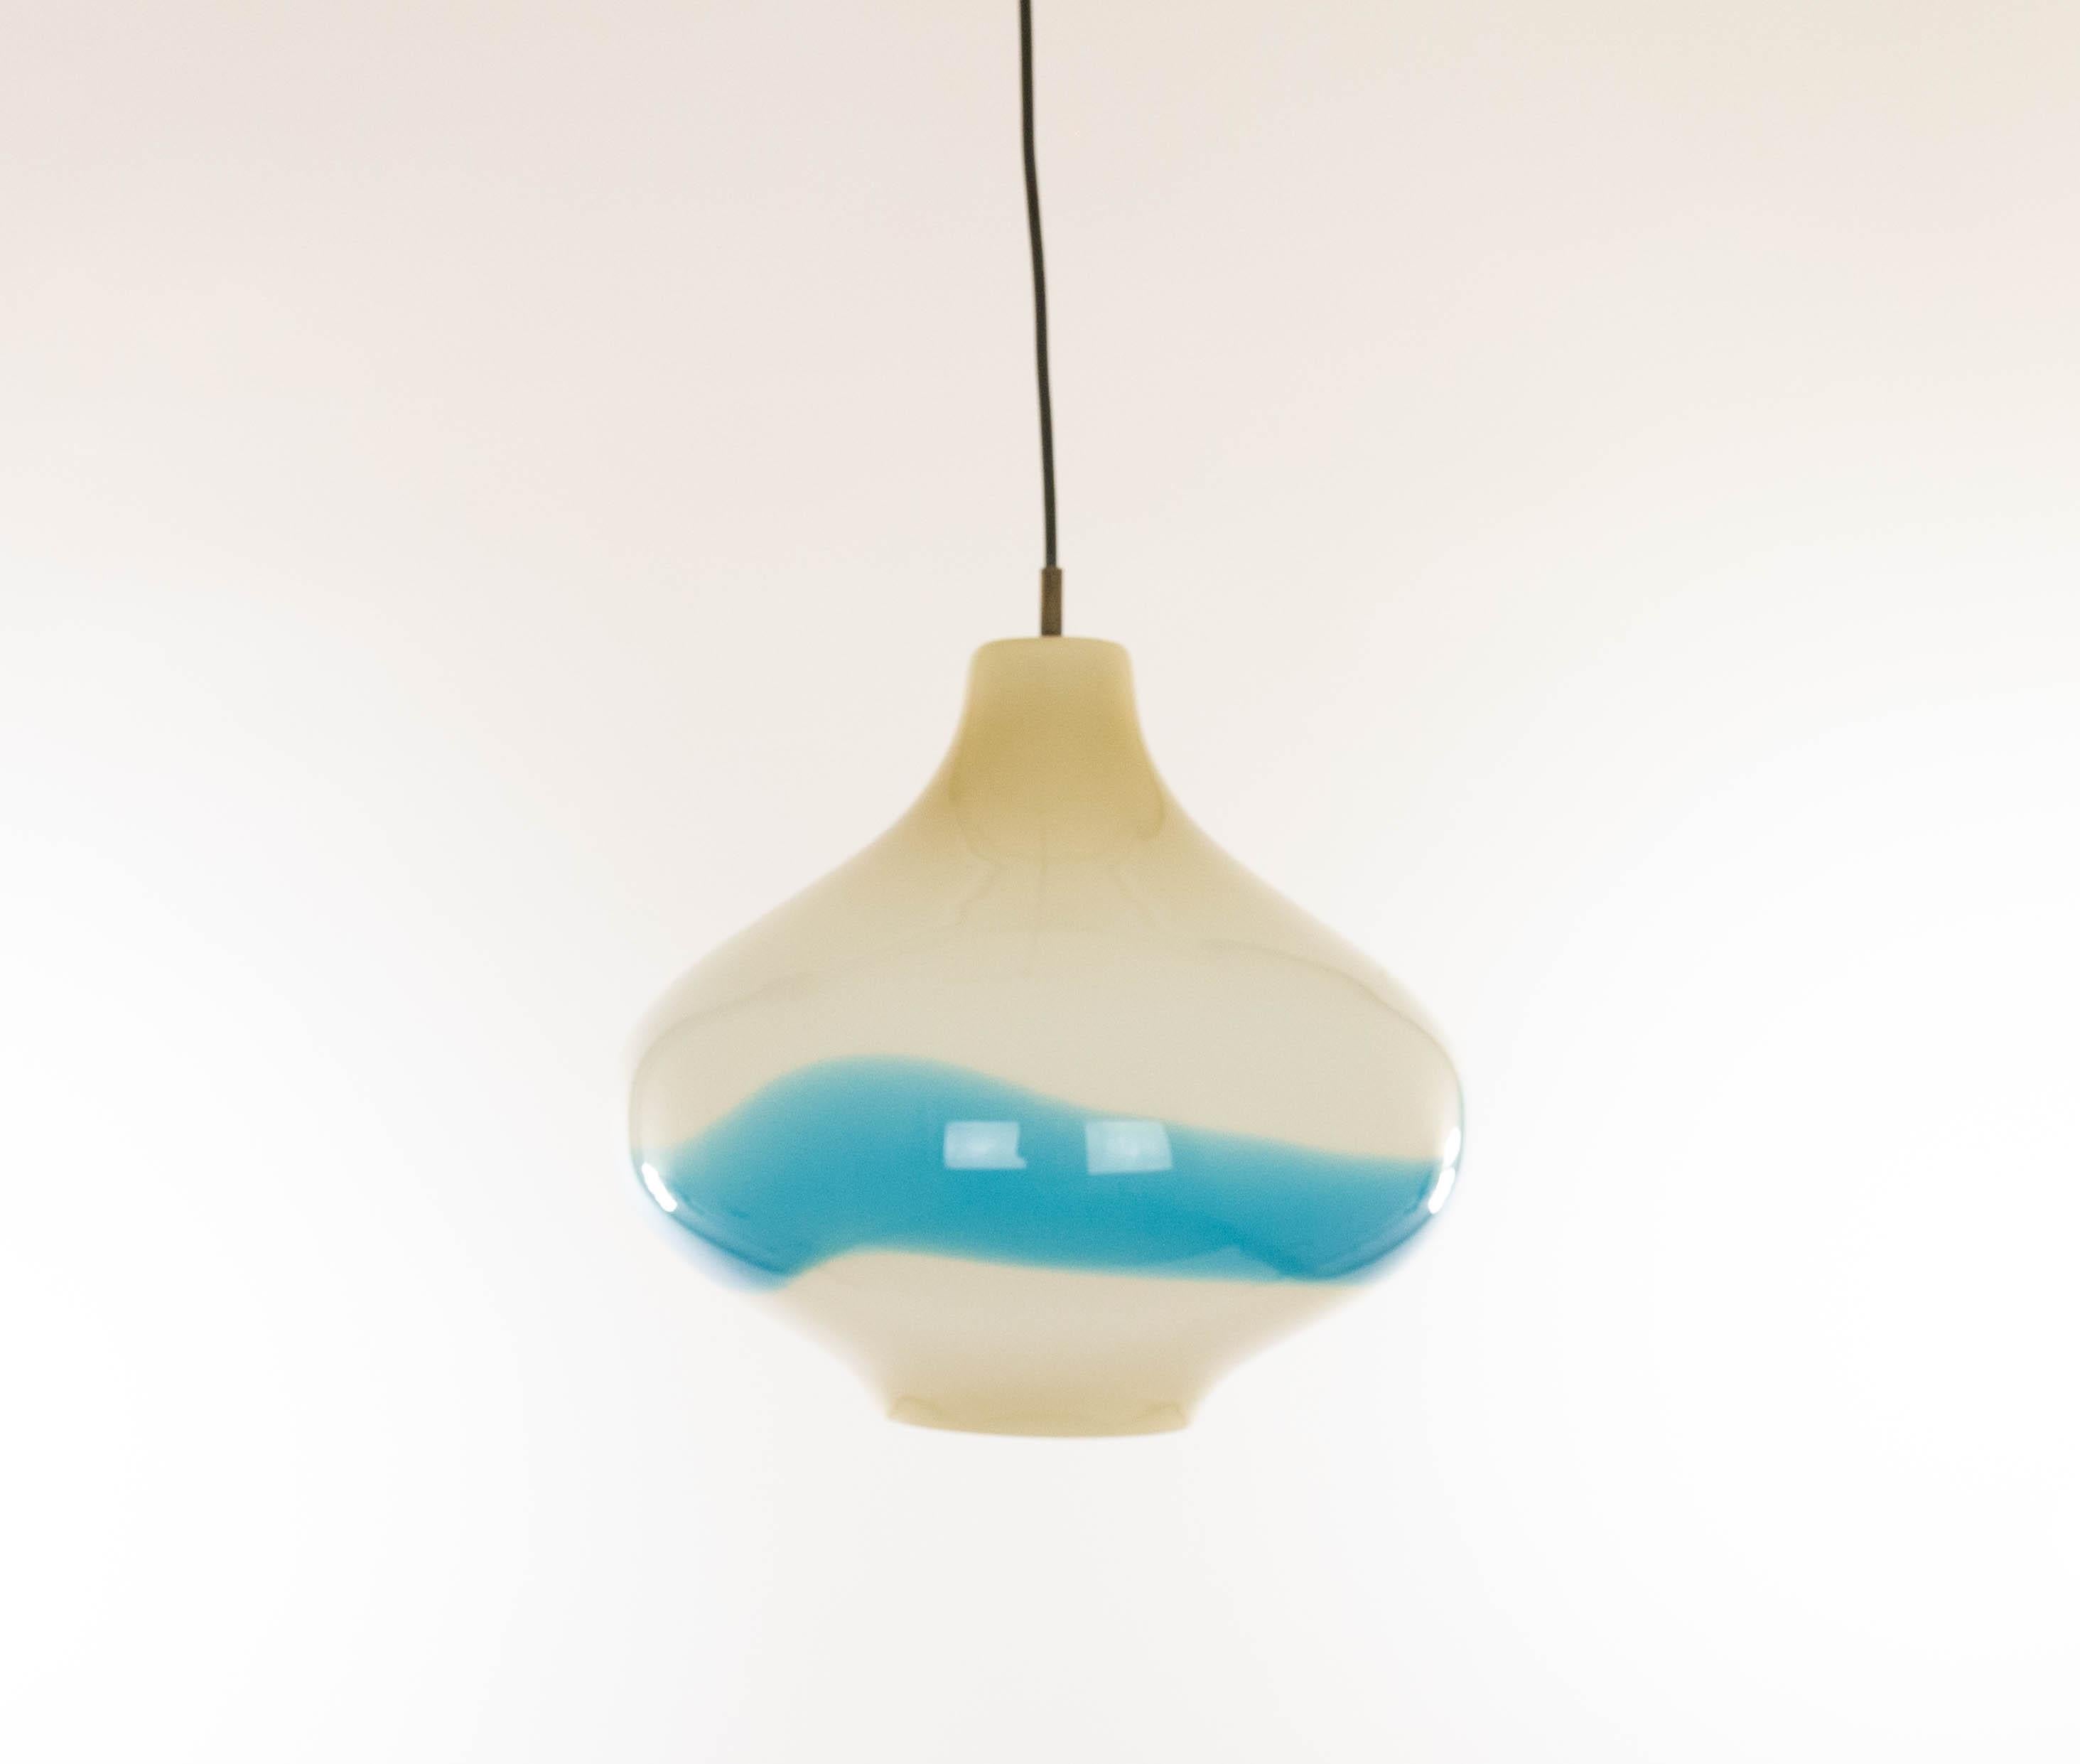 White, blue and sand coloured Cipolla pendant designed by Massimo Vignelli at the start of his impressive career in design and executed by Murano glass specialist Venini. 

This model has been produced in two different sizes, this is the regular